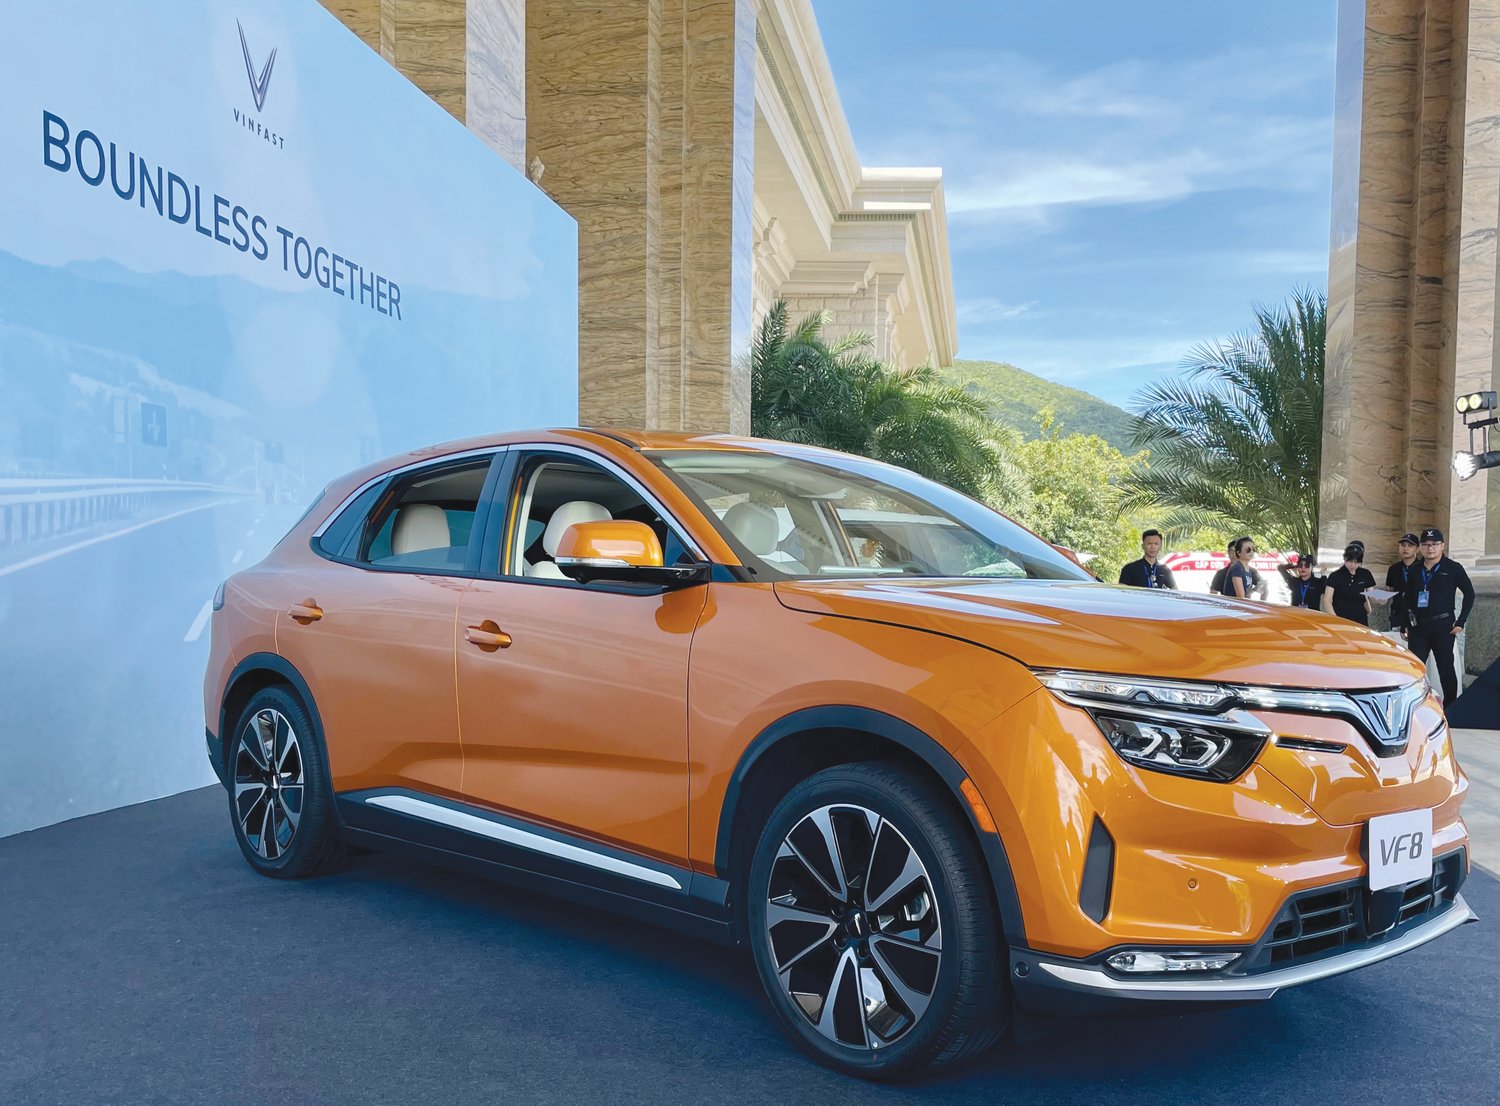 The VinFast VF-8 is displayed at VinPearl Resort in Nha Trang, Vietnam. The car is a pre-production model of the electric SUV expected to be manufactured at the Chatham County factory.